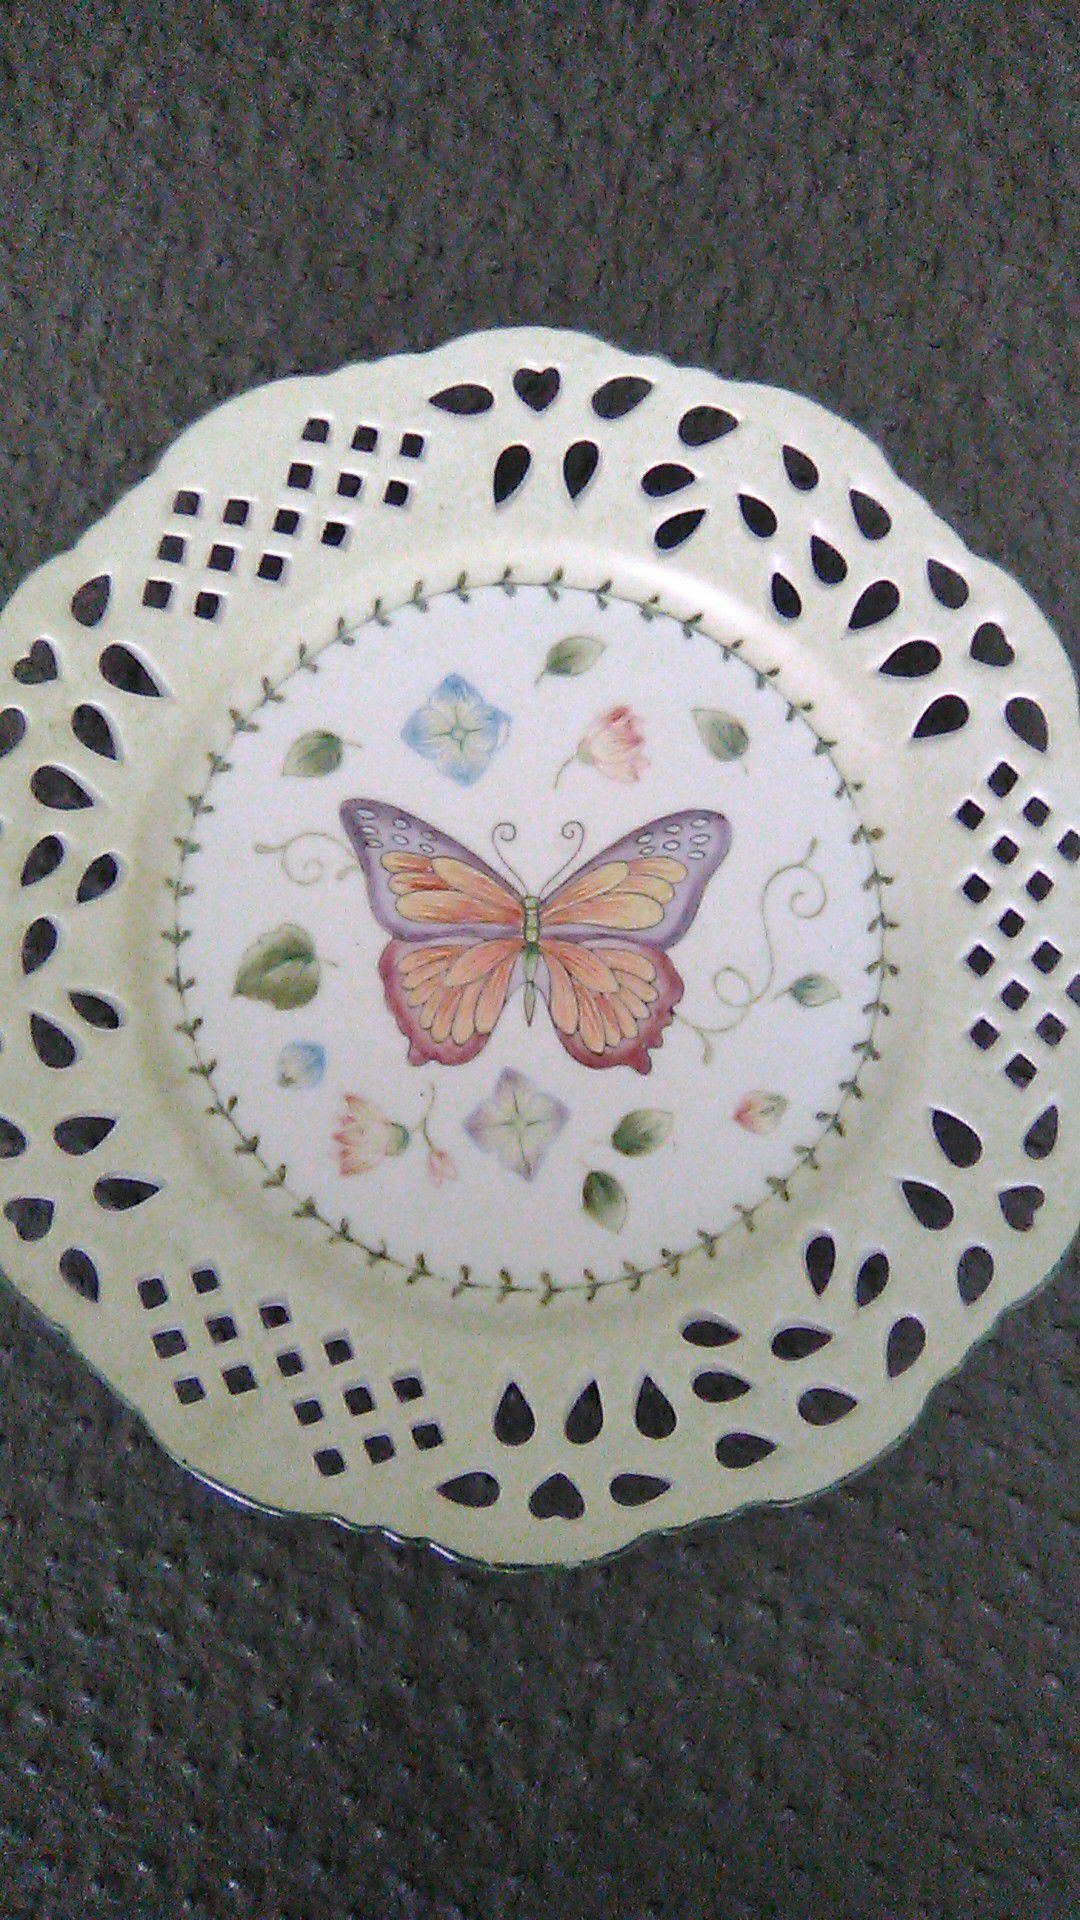 Butterfly decorative plate